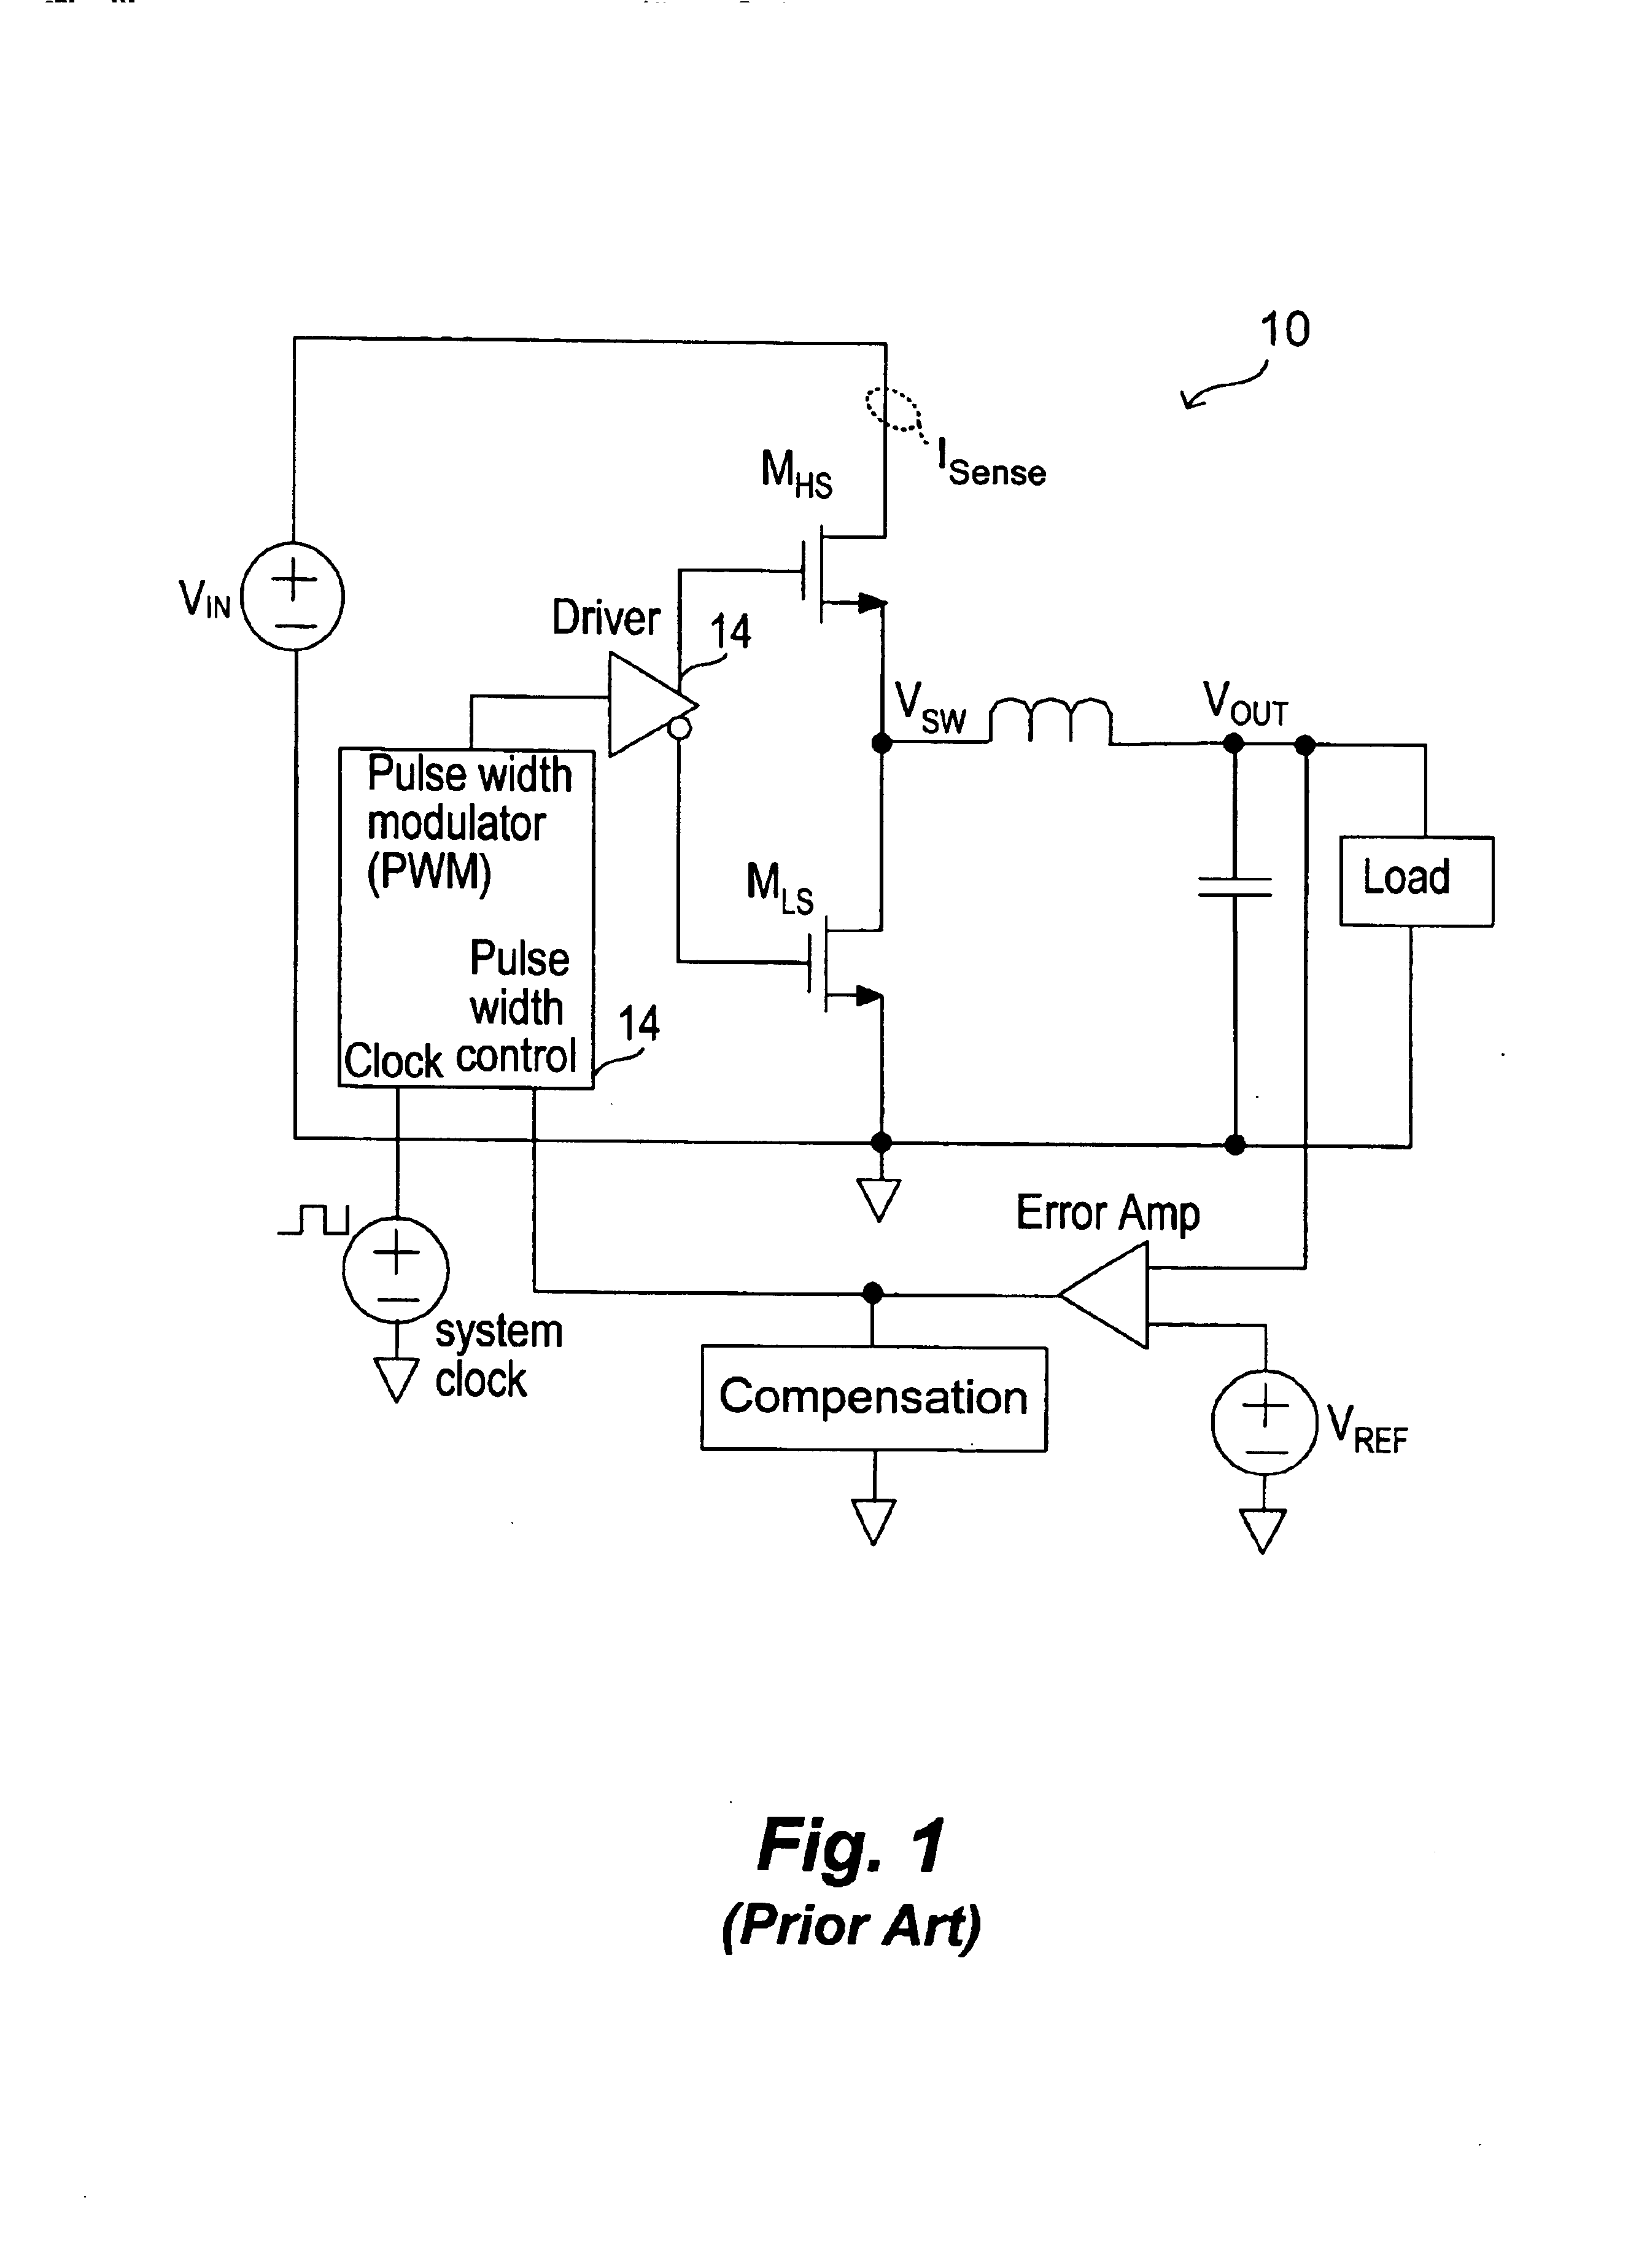 Selective high-side and low-side current sensing in switching power supplies